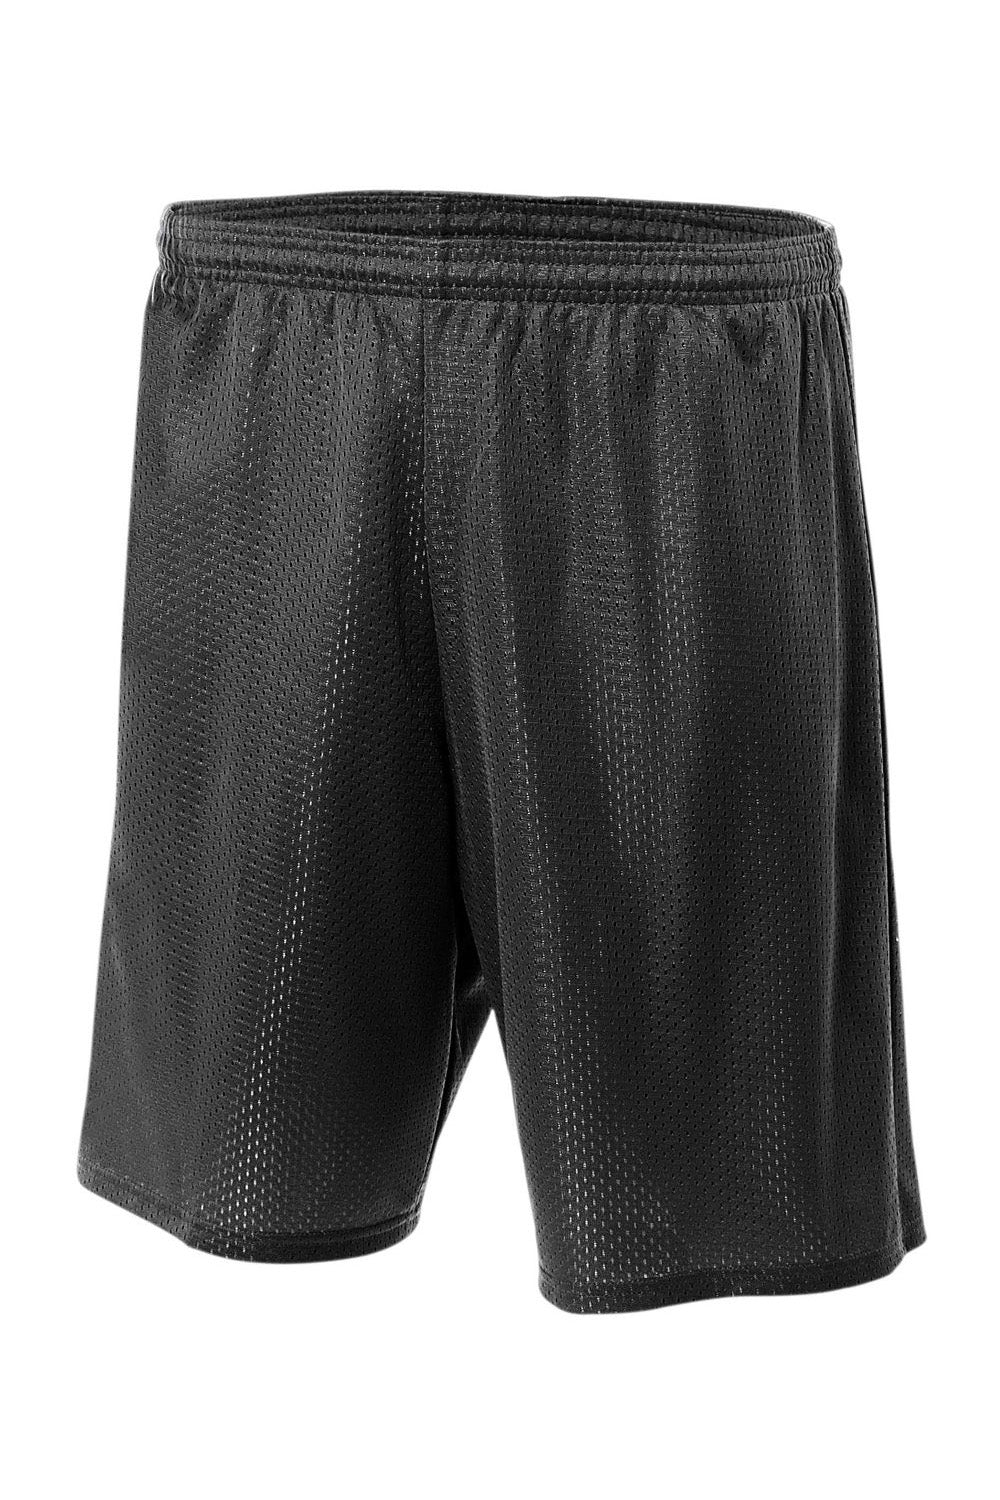 A4 NB5301 Youth Moisture Wicking Mesh Shorts Black Flat Front